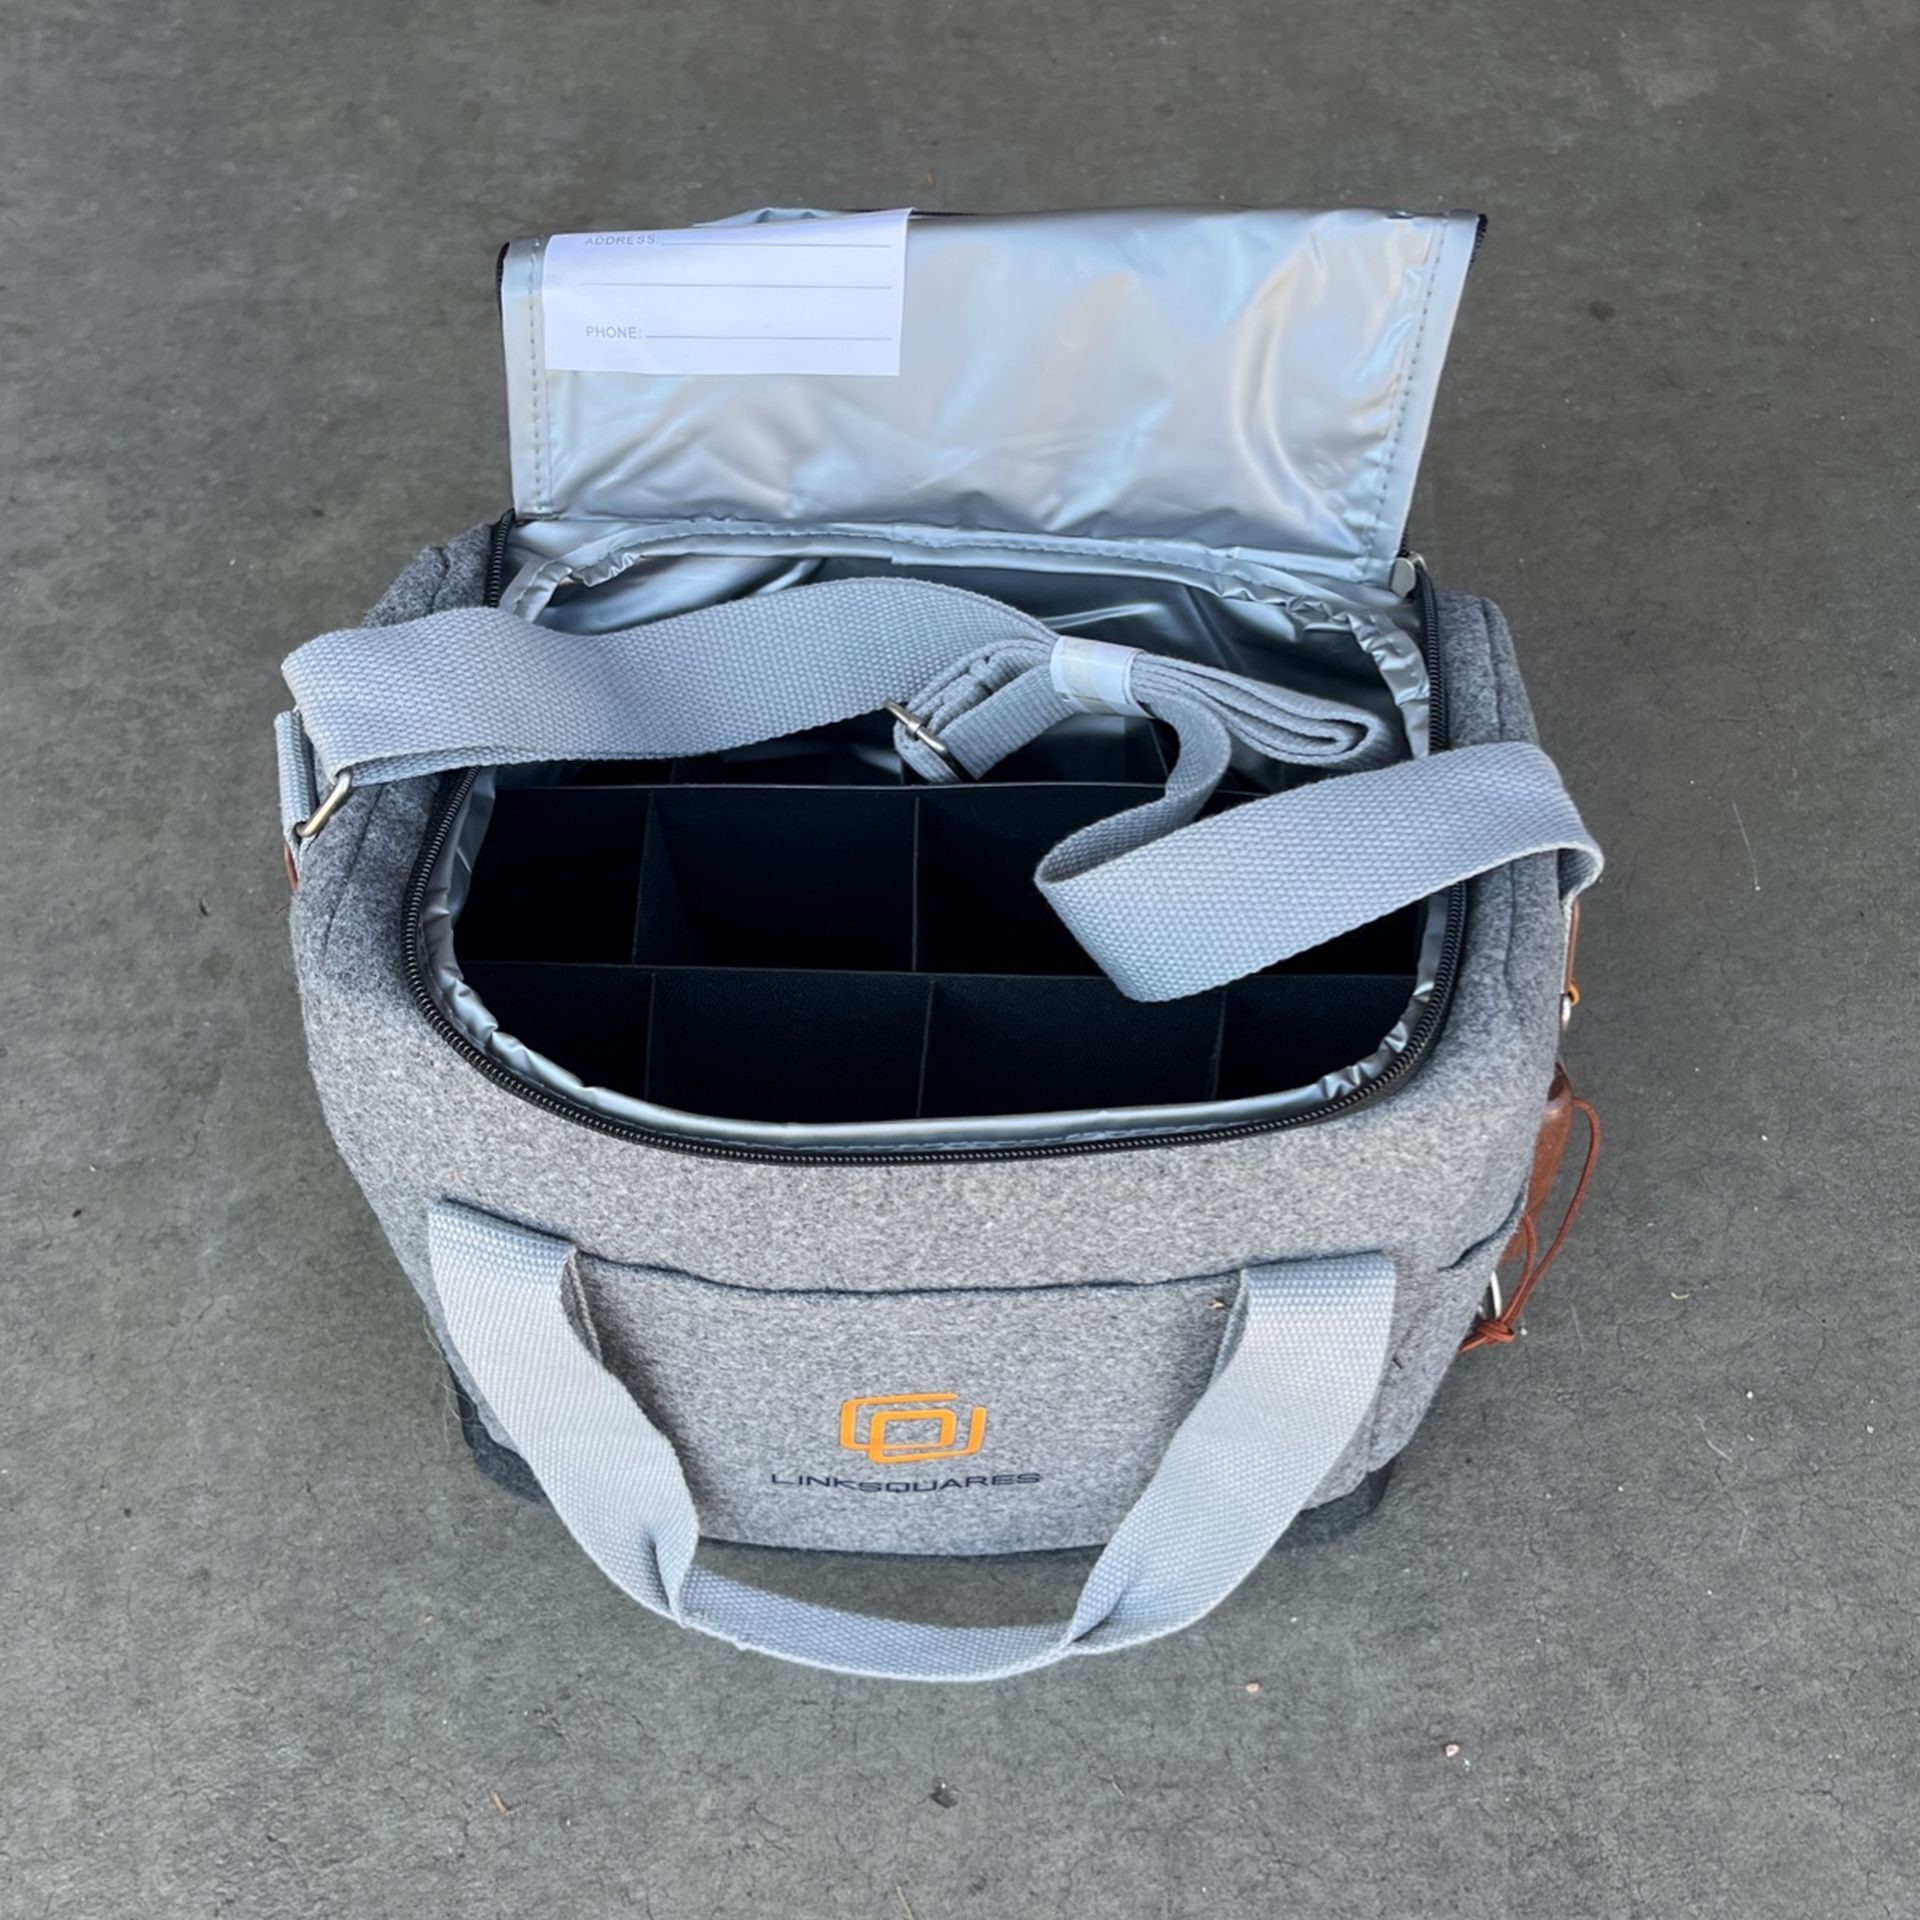 Field $ Co Soft Sided Cooler